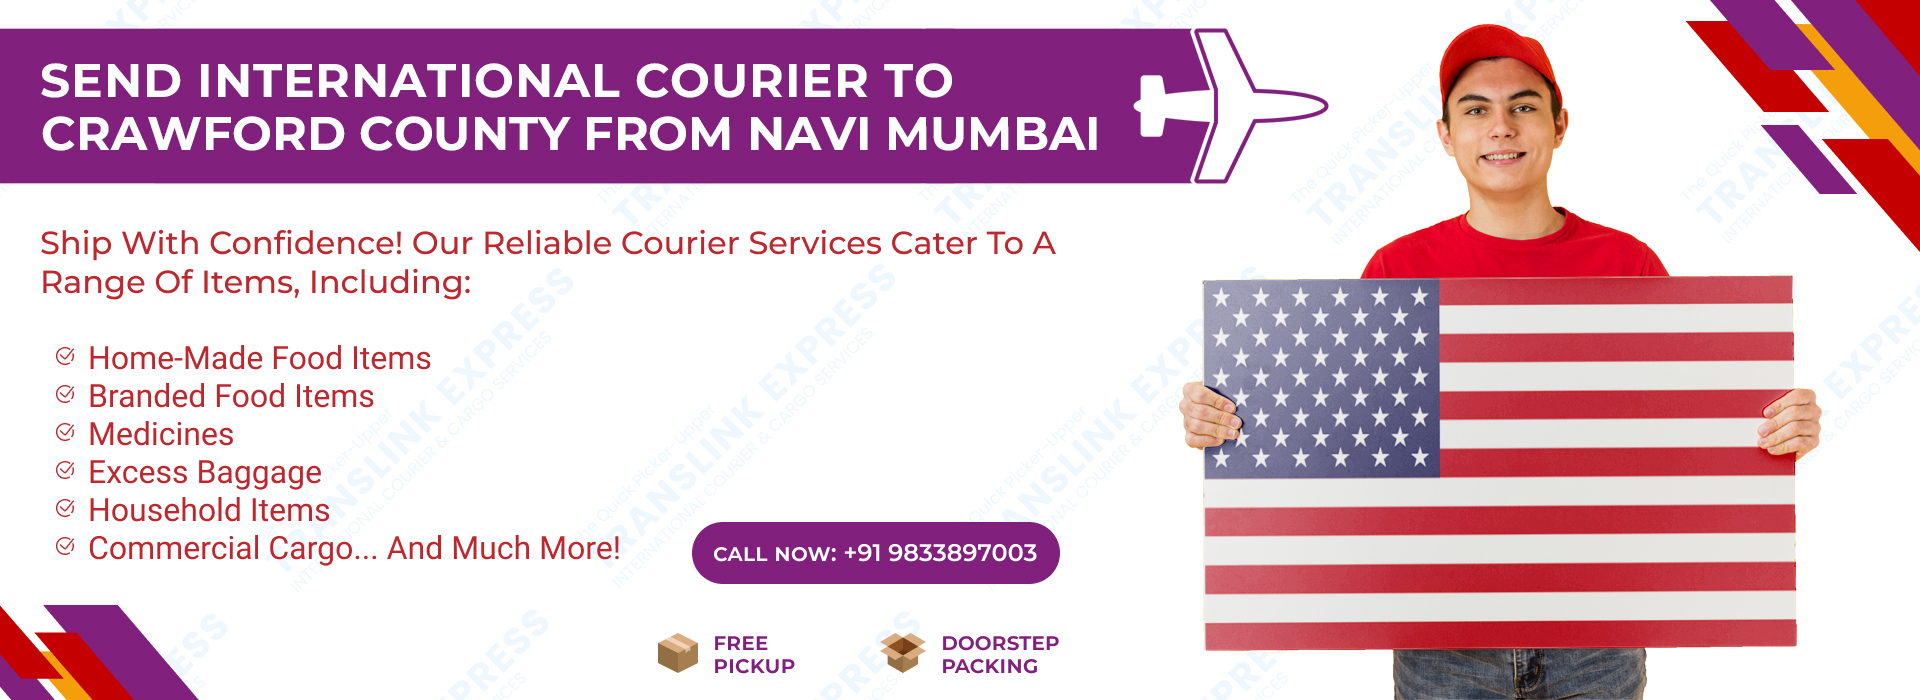 Courier to Crawford County From Navi Mumbai